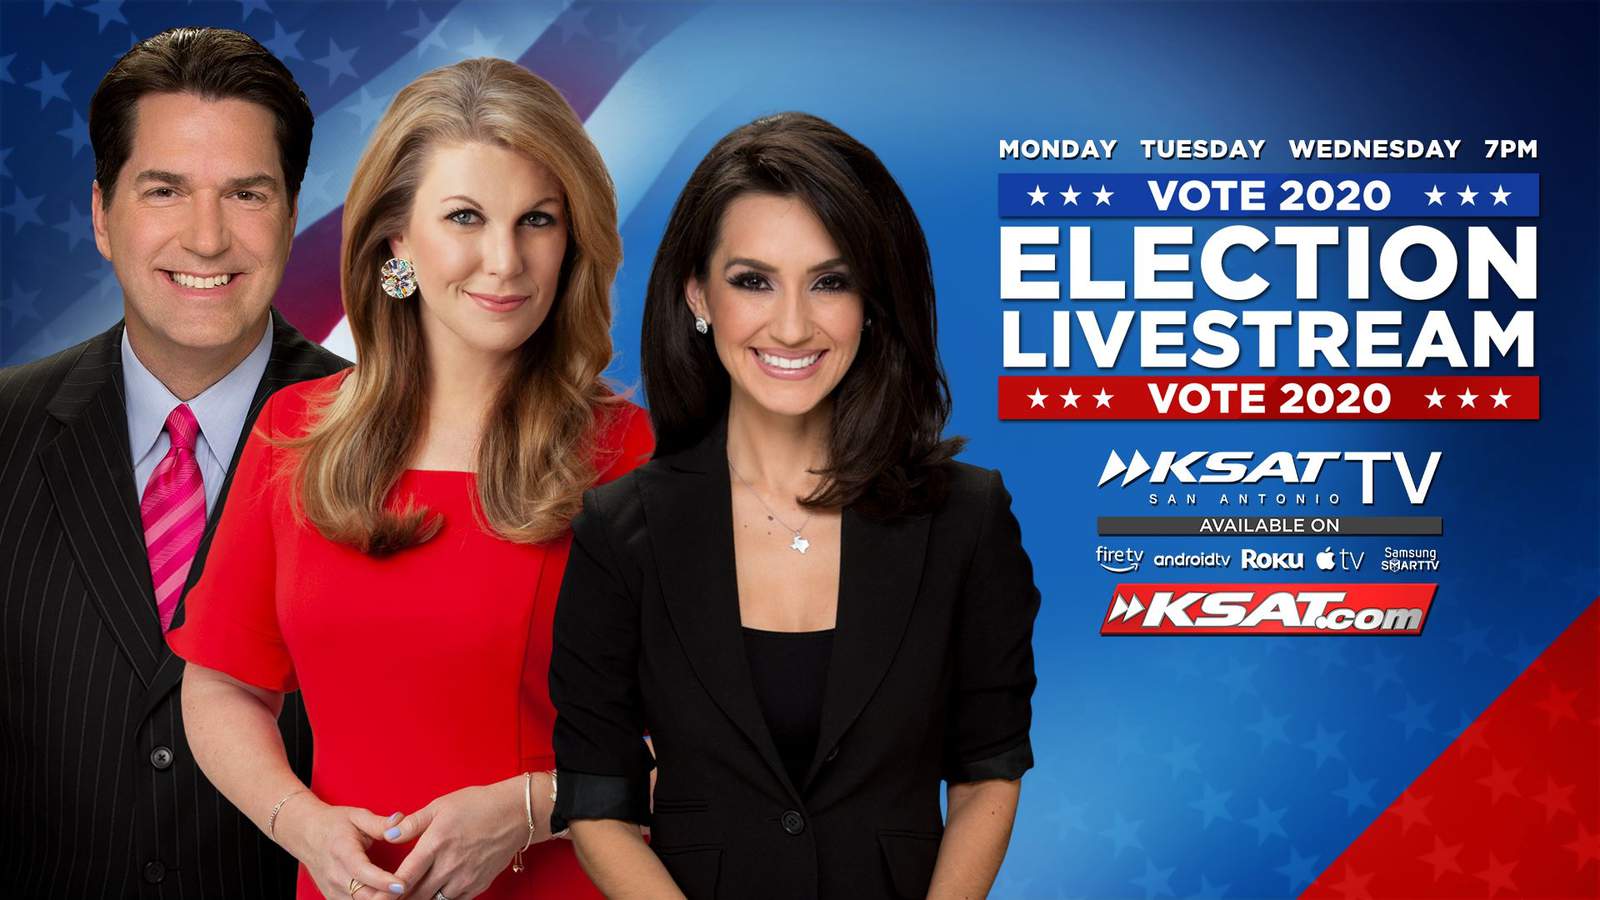 WATCH: Political experts join KSAT anchors for election eve livestream at 6:30 p.m.